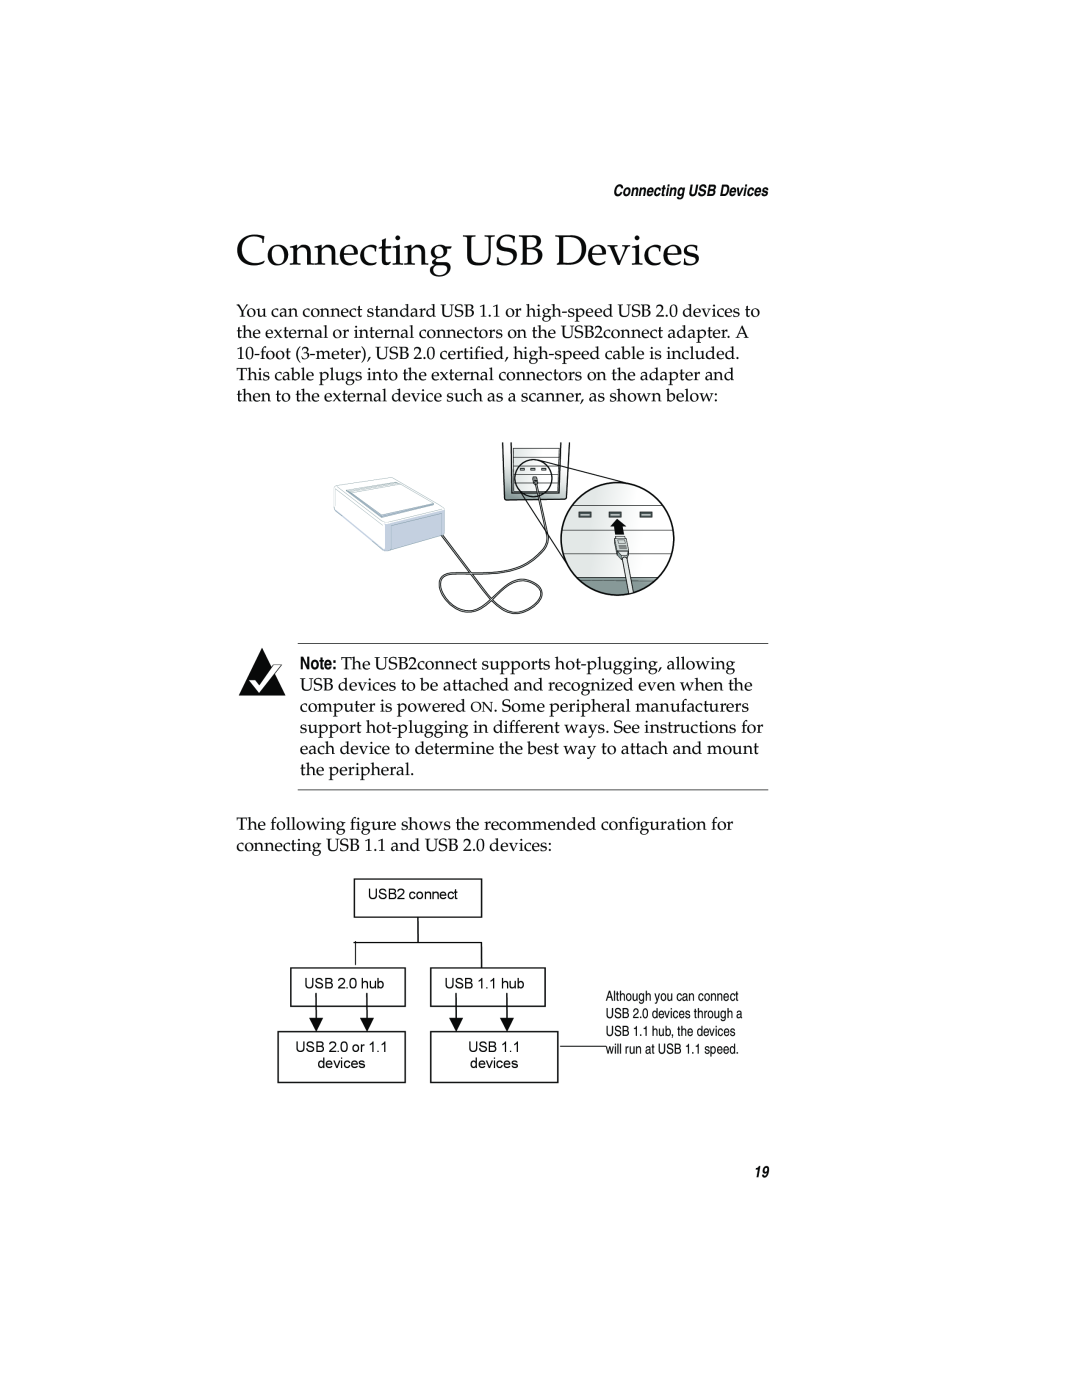 Adaptec USB2connect Host Bus Adapter manual Connecting USB Devices 